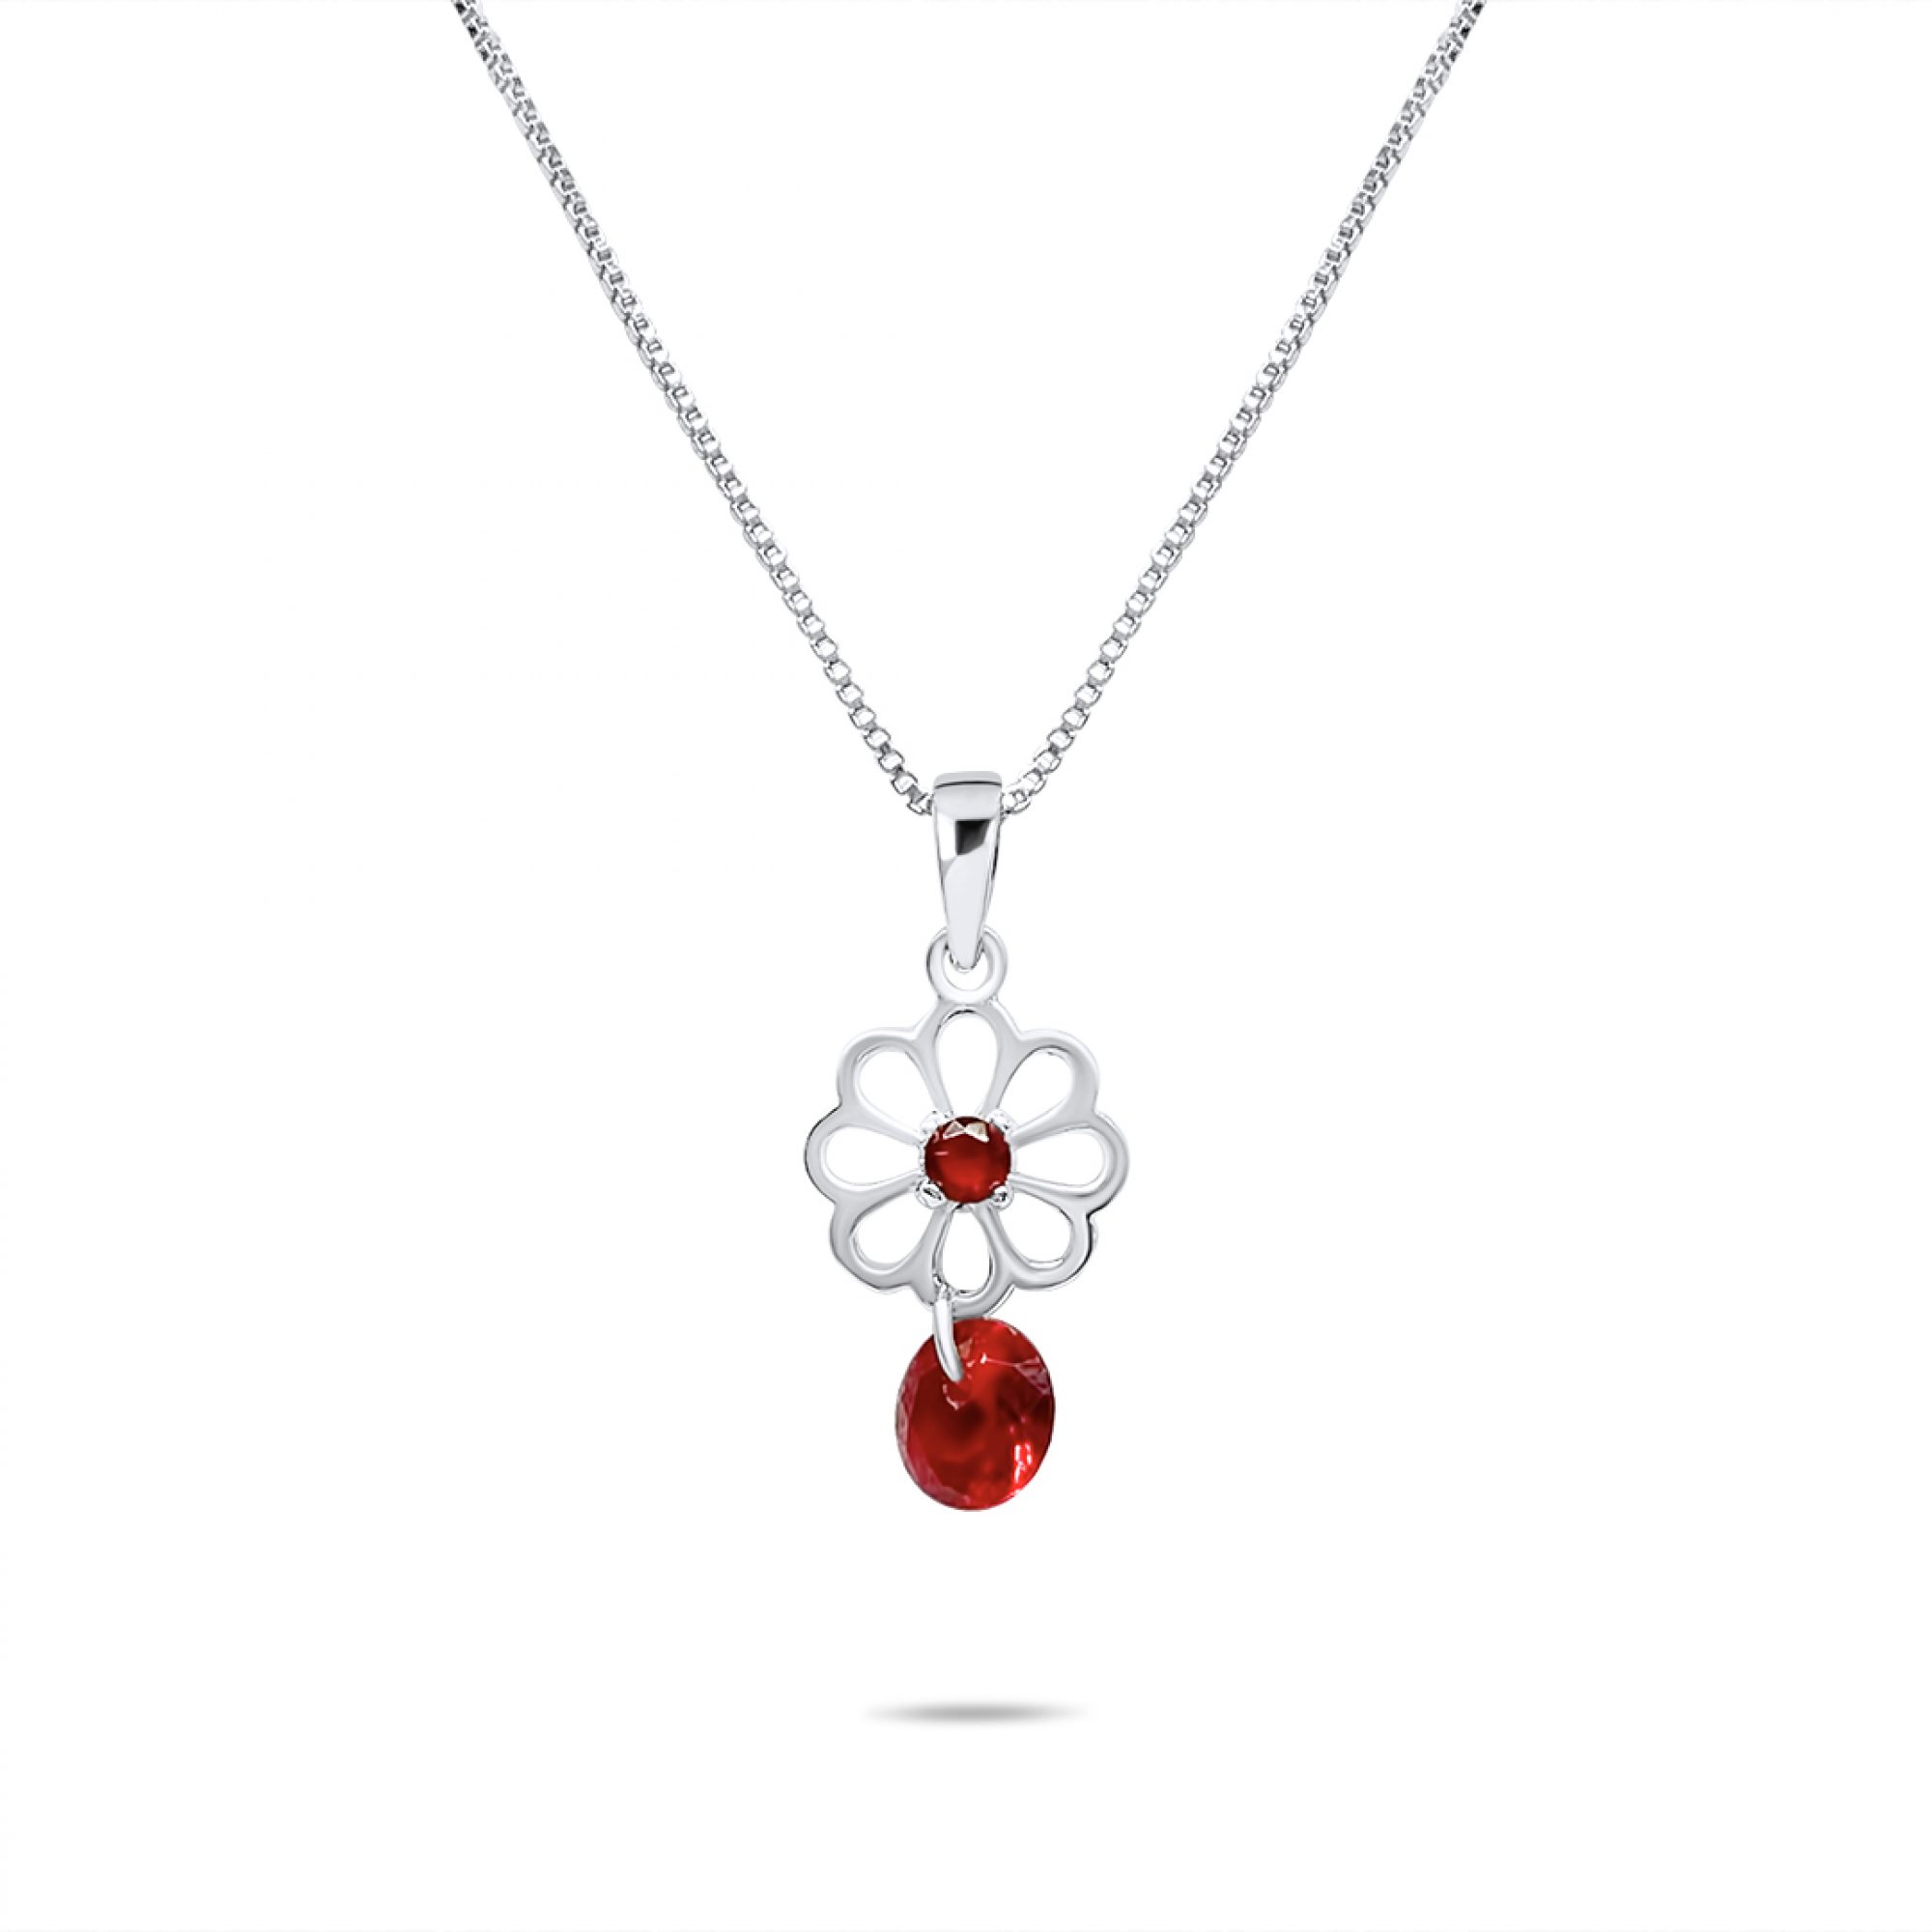 Necklace with ruby stones